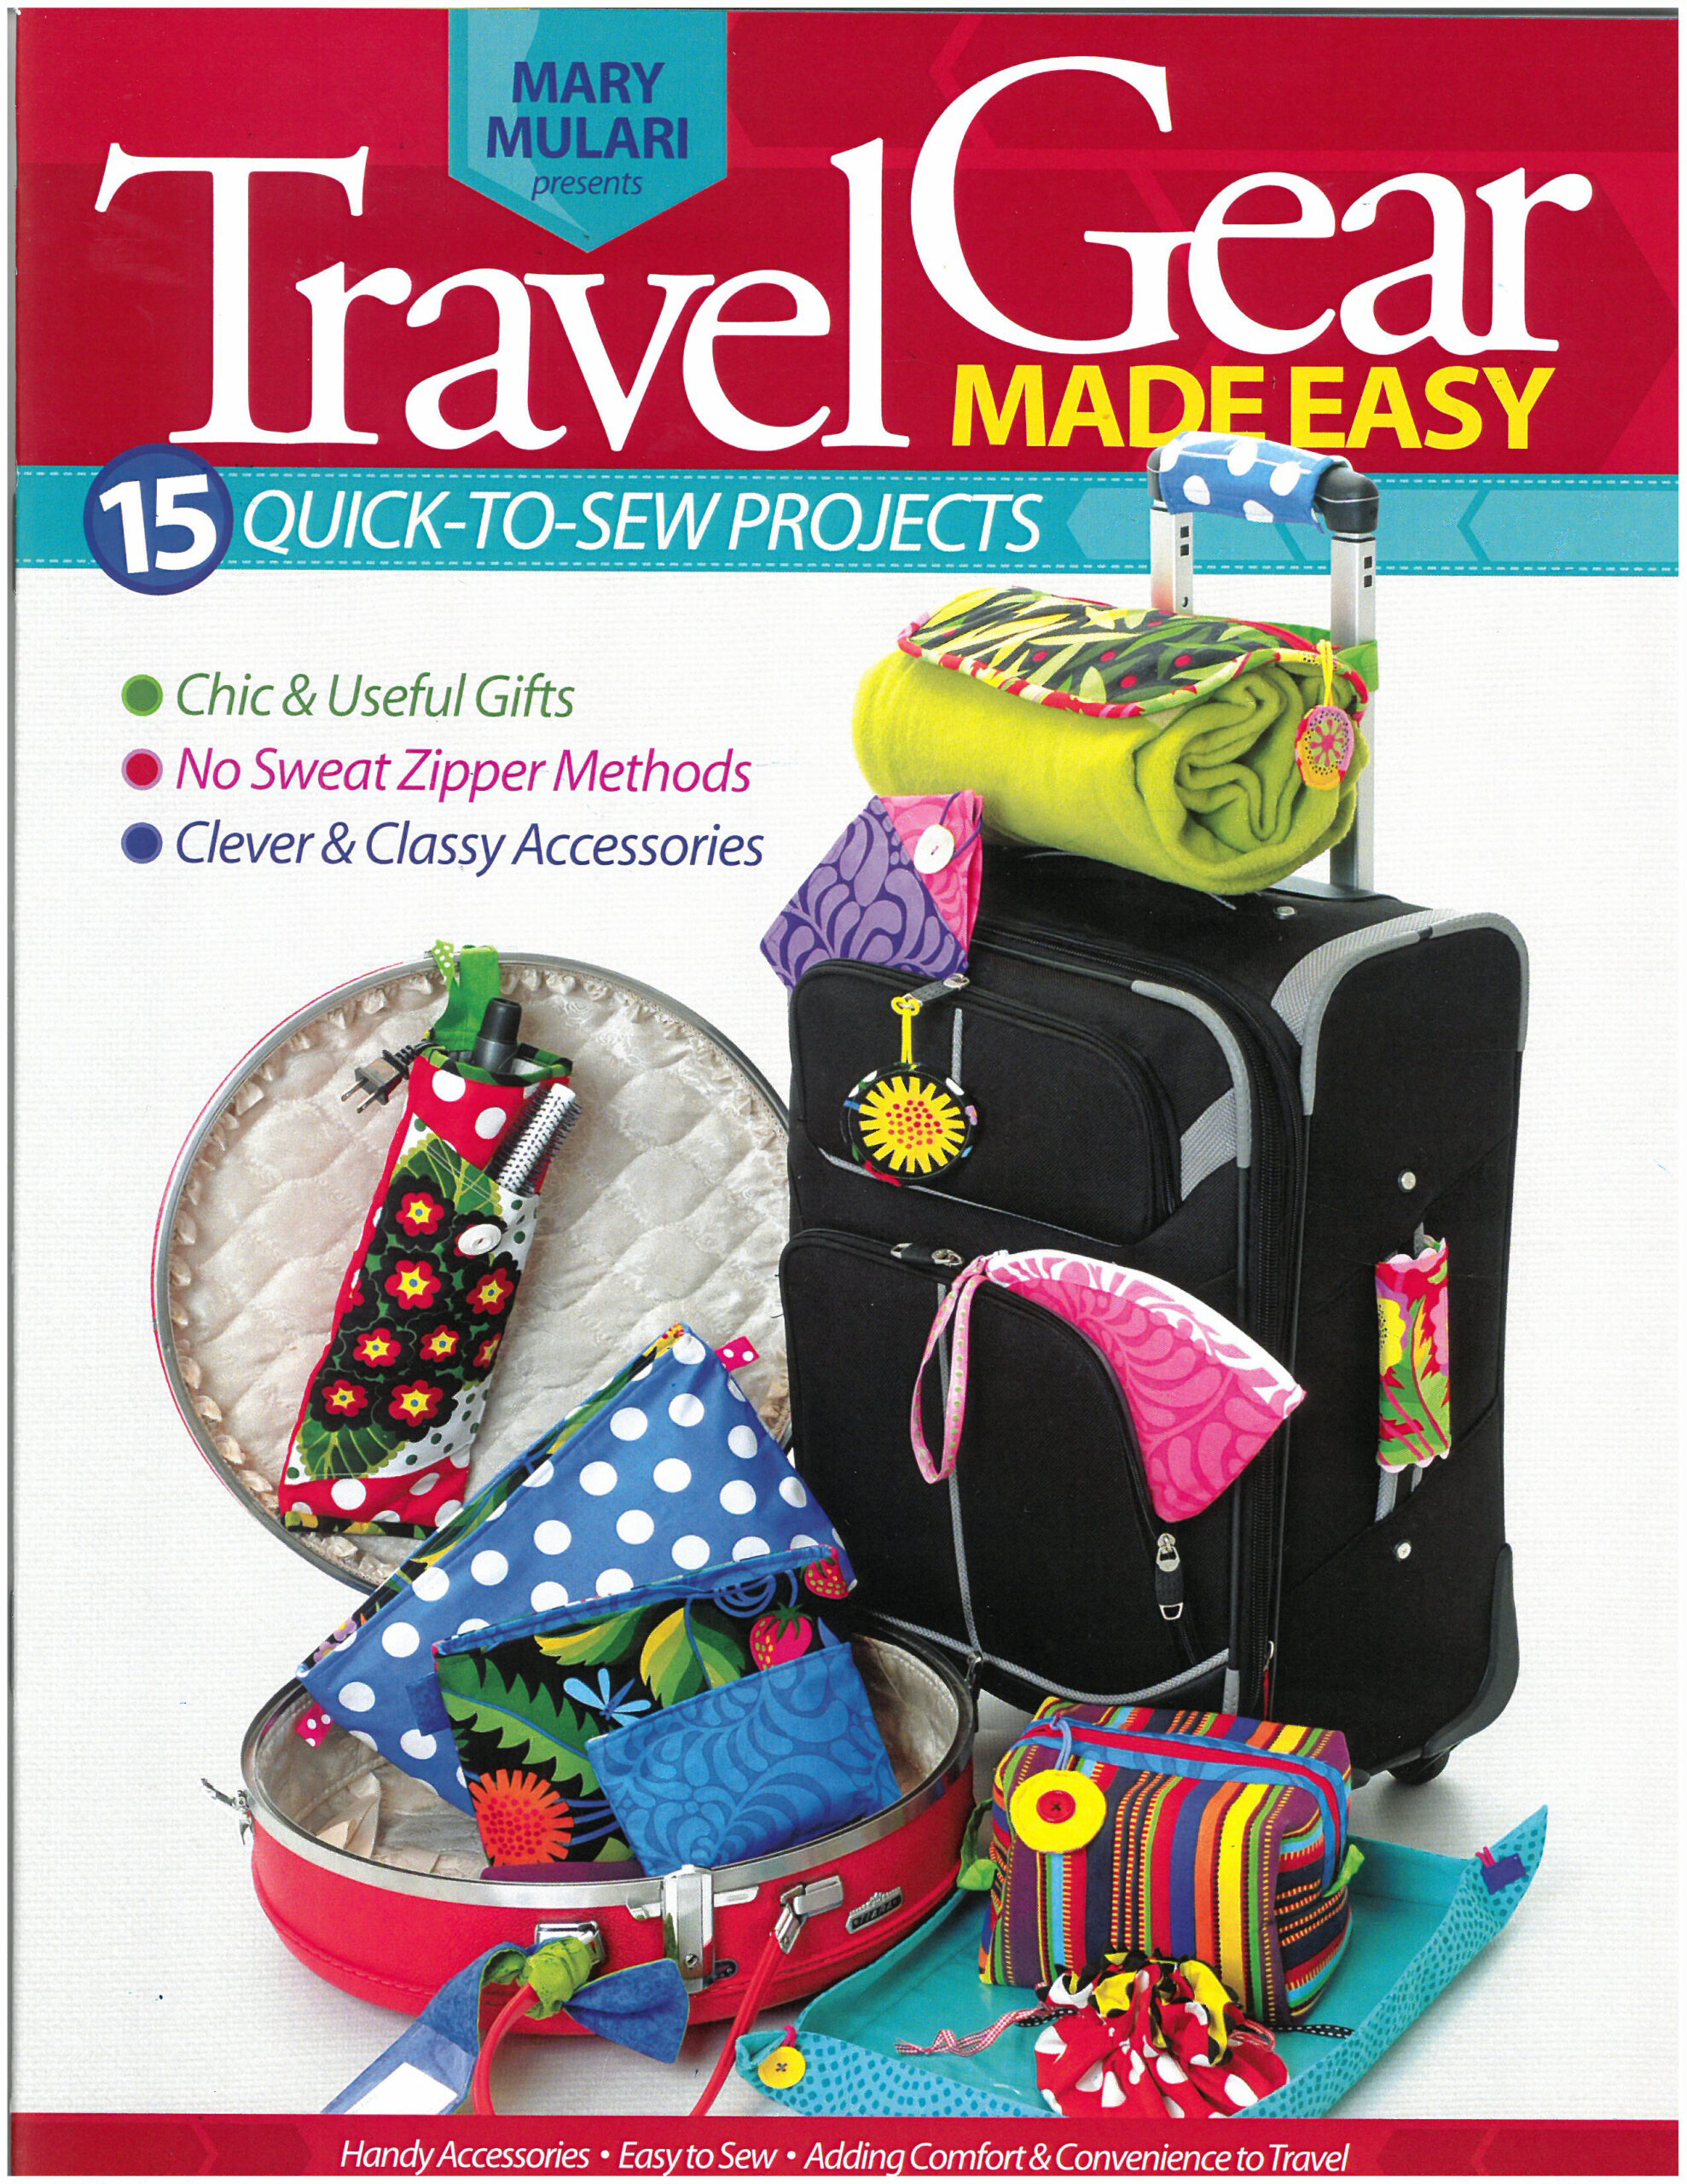 Travel Gear Made Easy